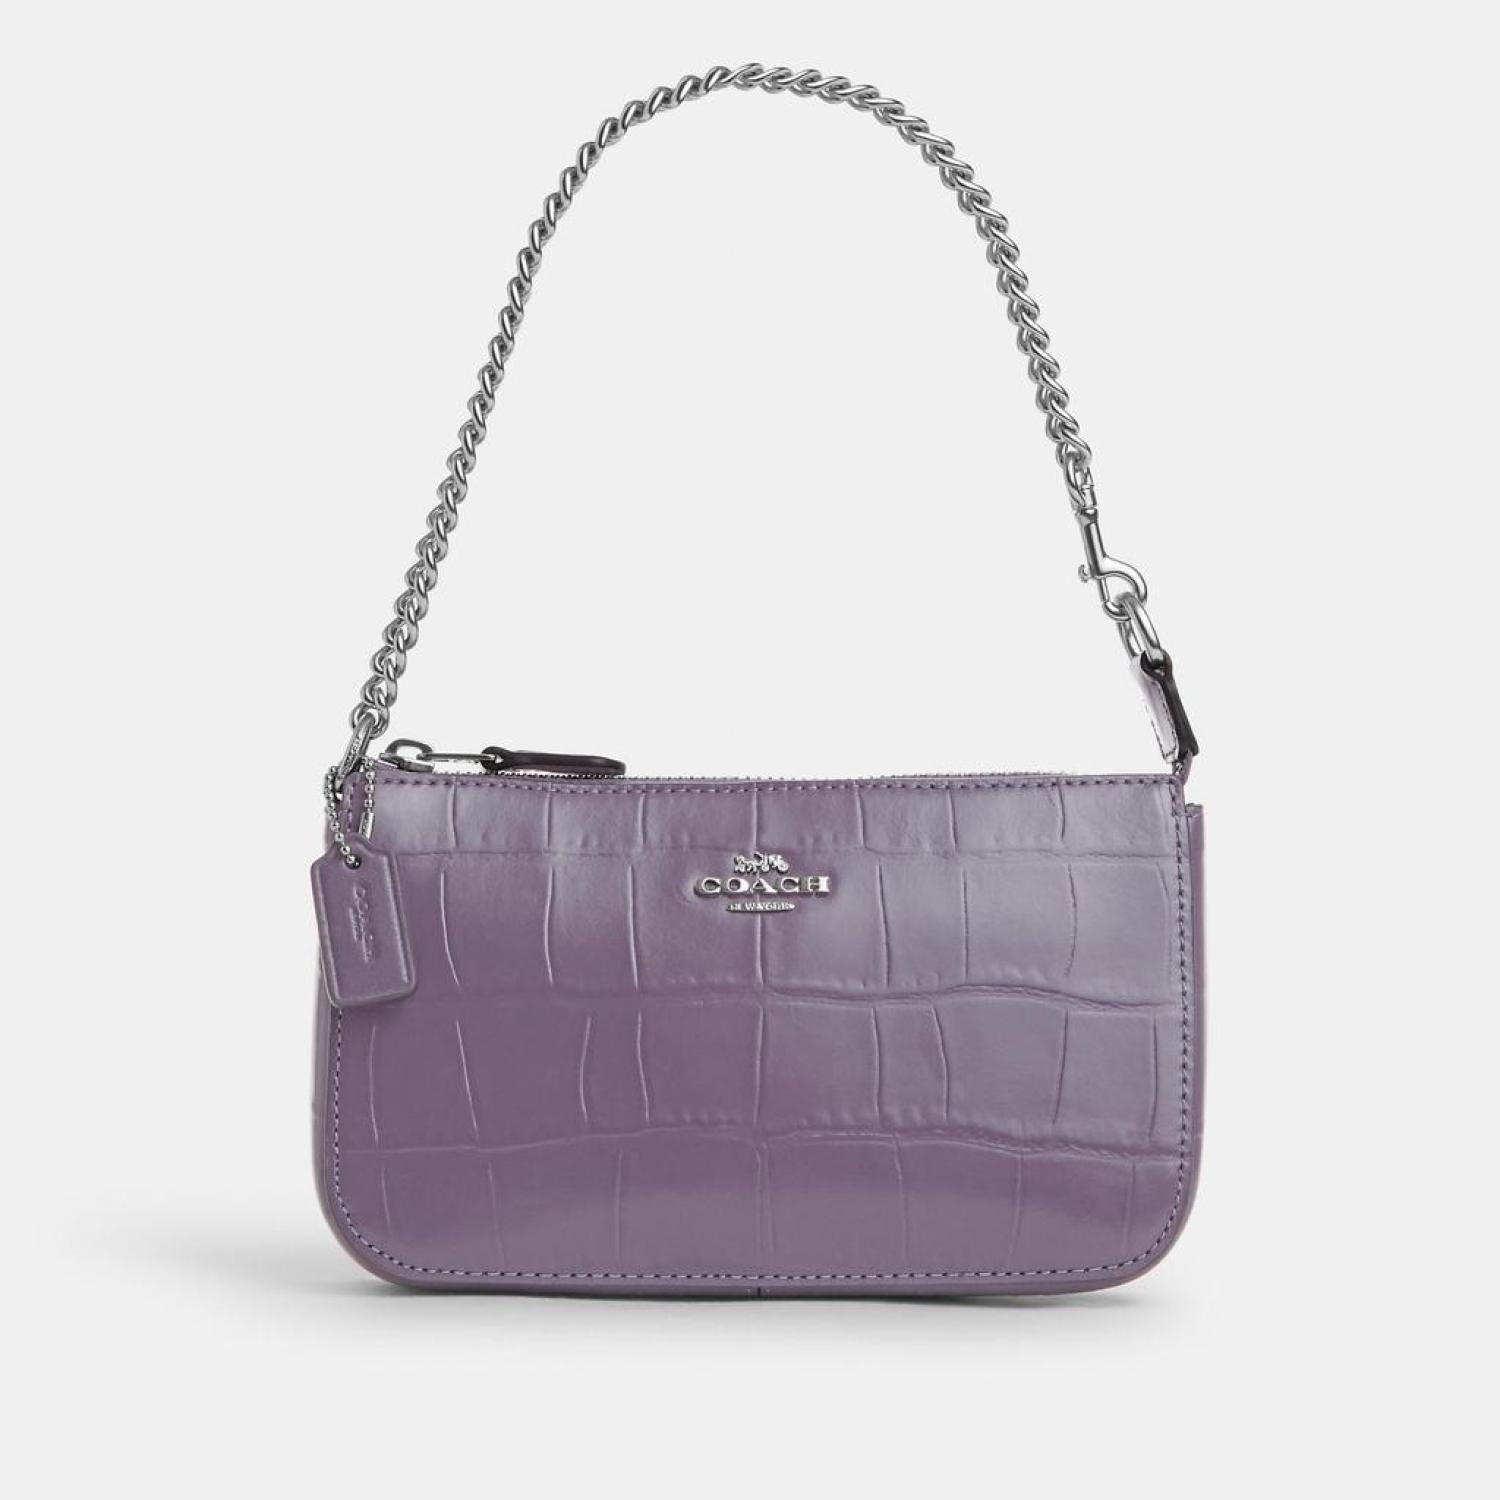 Tammie Shoulder Bag In Colorblock | COACH OUTLET | Shoulder bag, Bags, Coach  outlet